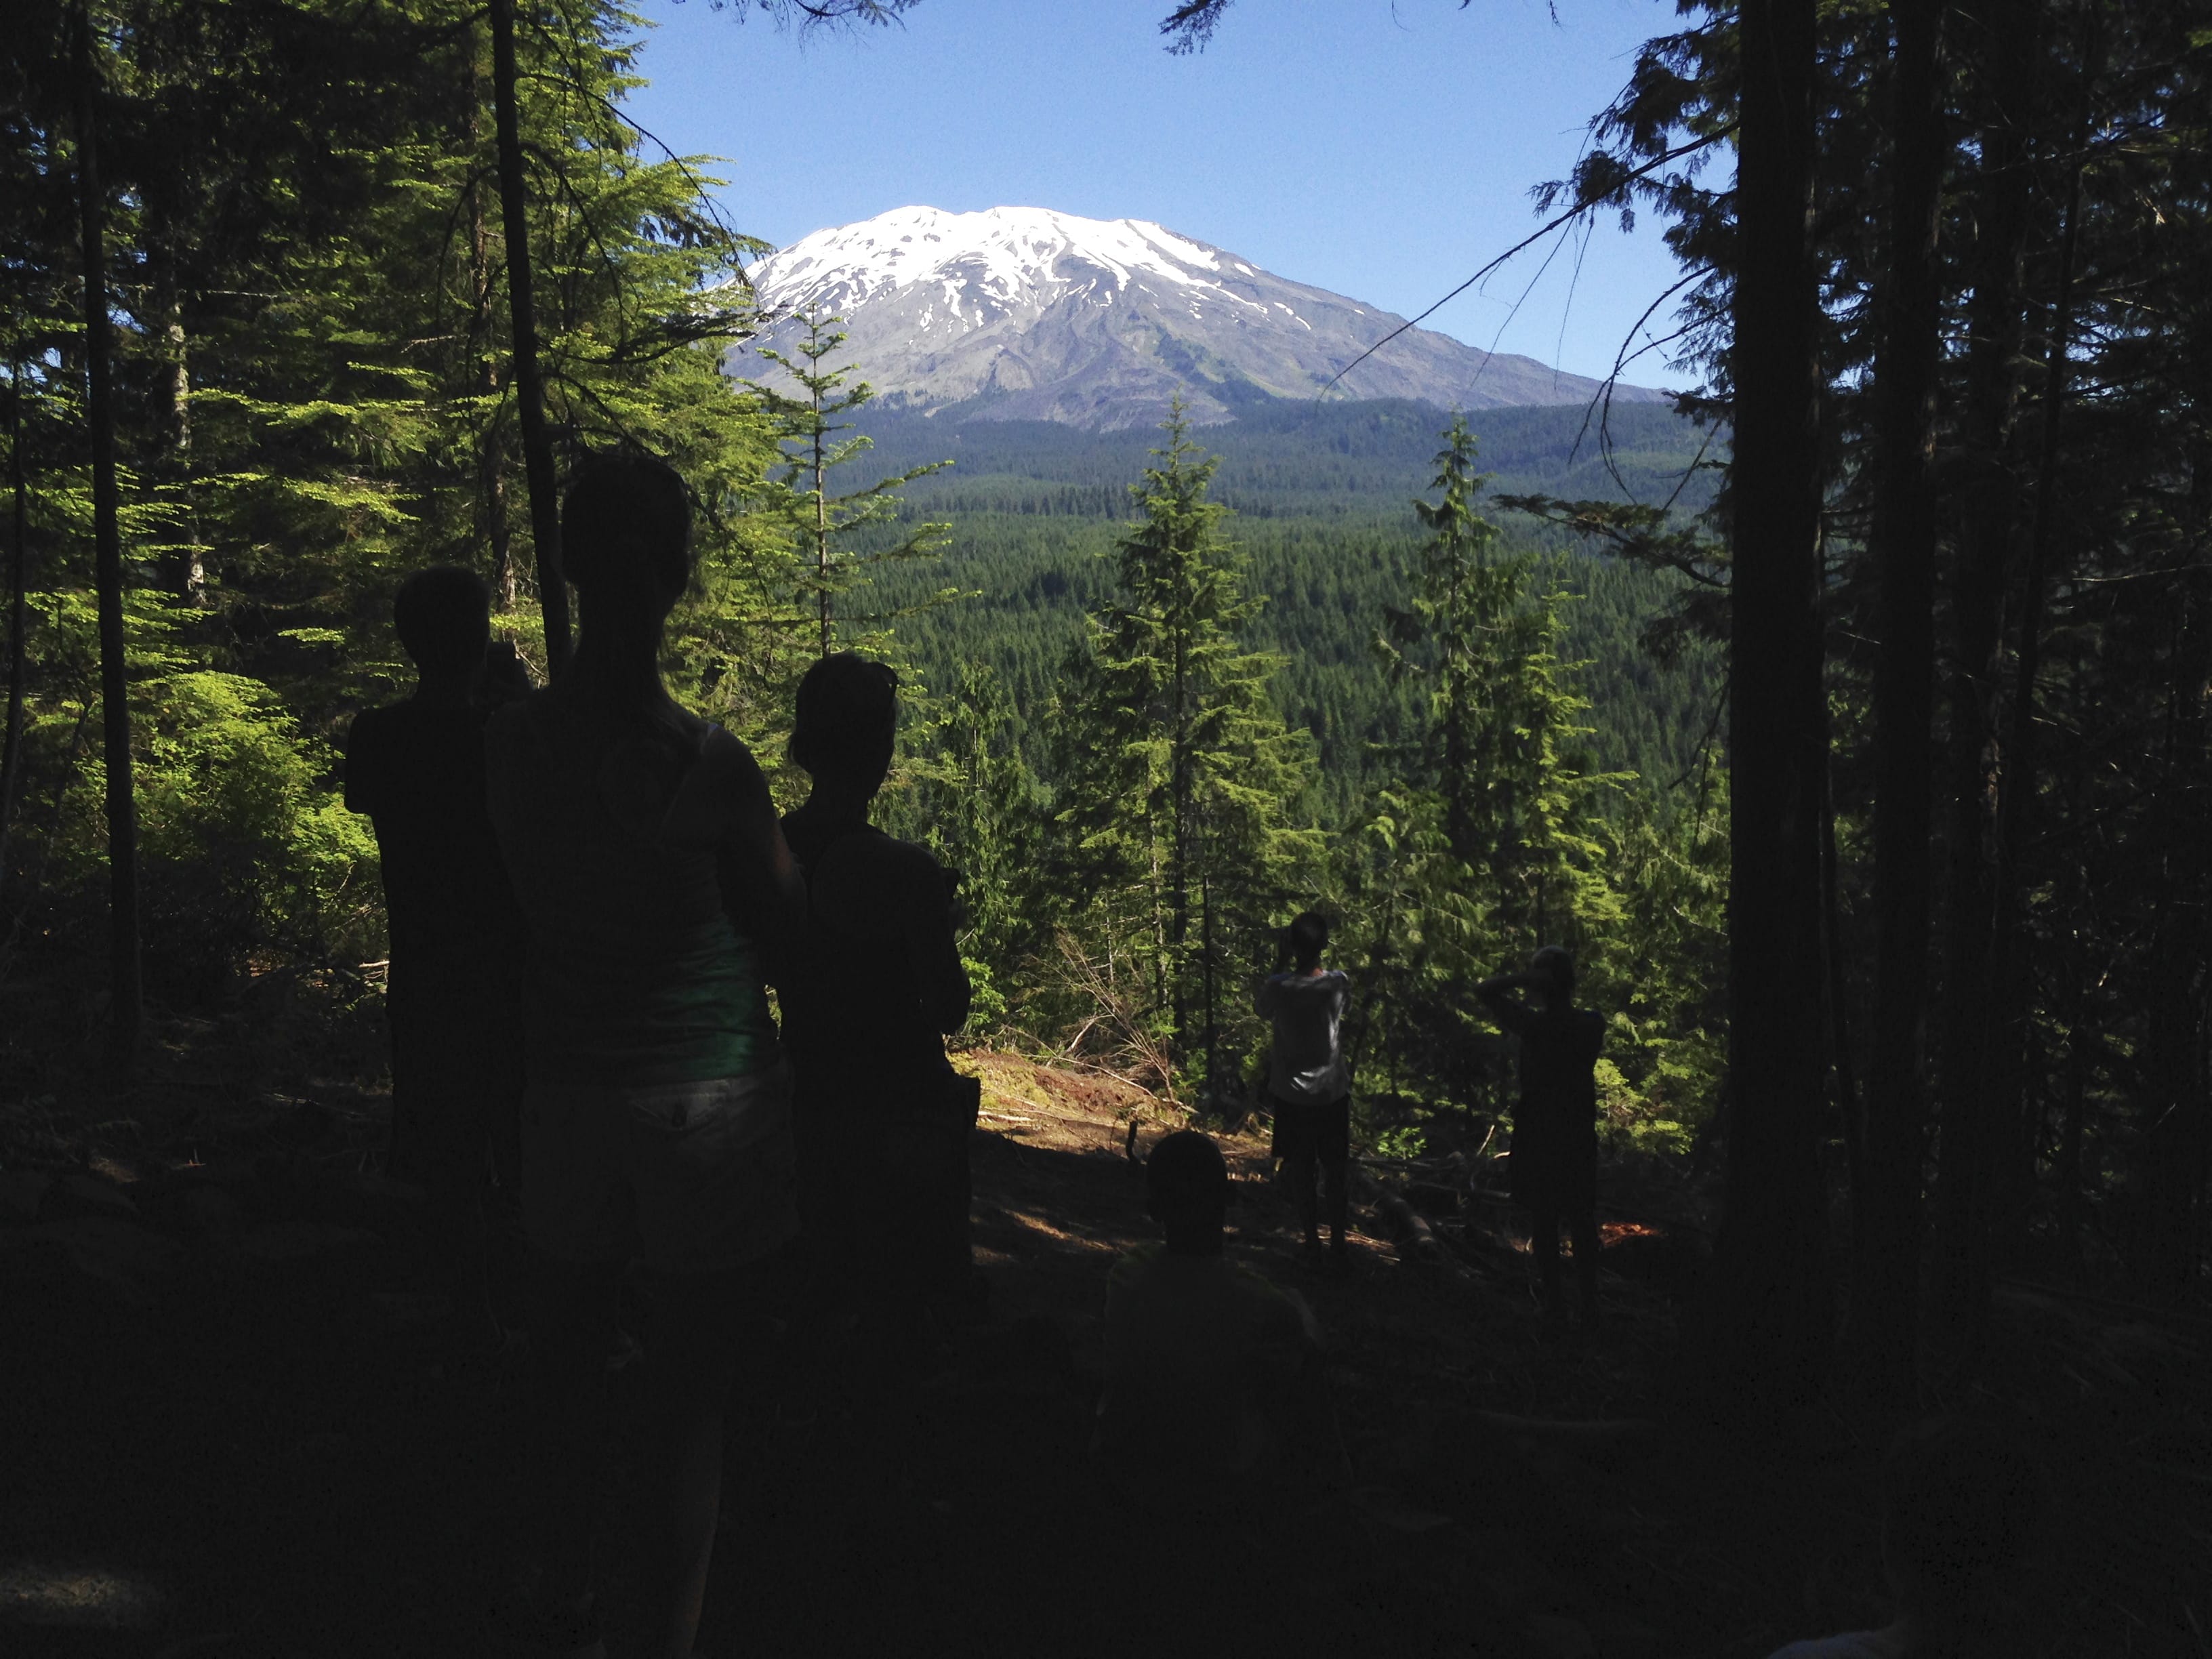 Mount St. Helens, visible from a trail near Cougar, in June 2015. Visitors will have the opportunity to explore Mount St. Helens in a variety of ways throughout 2017, thanks to programs offered by the Mount St. Helens Institute.